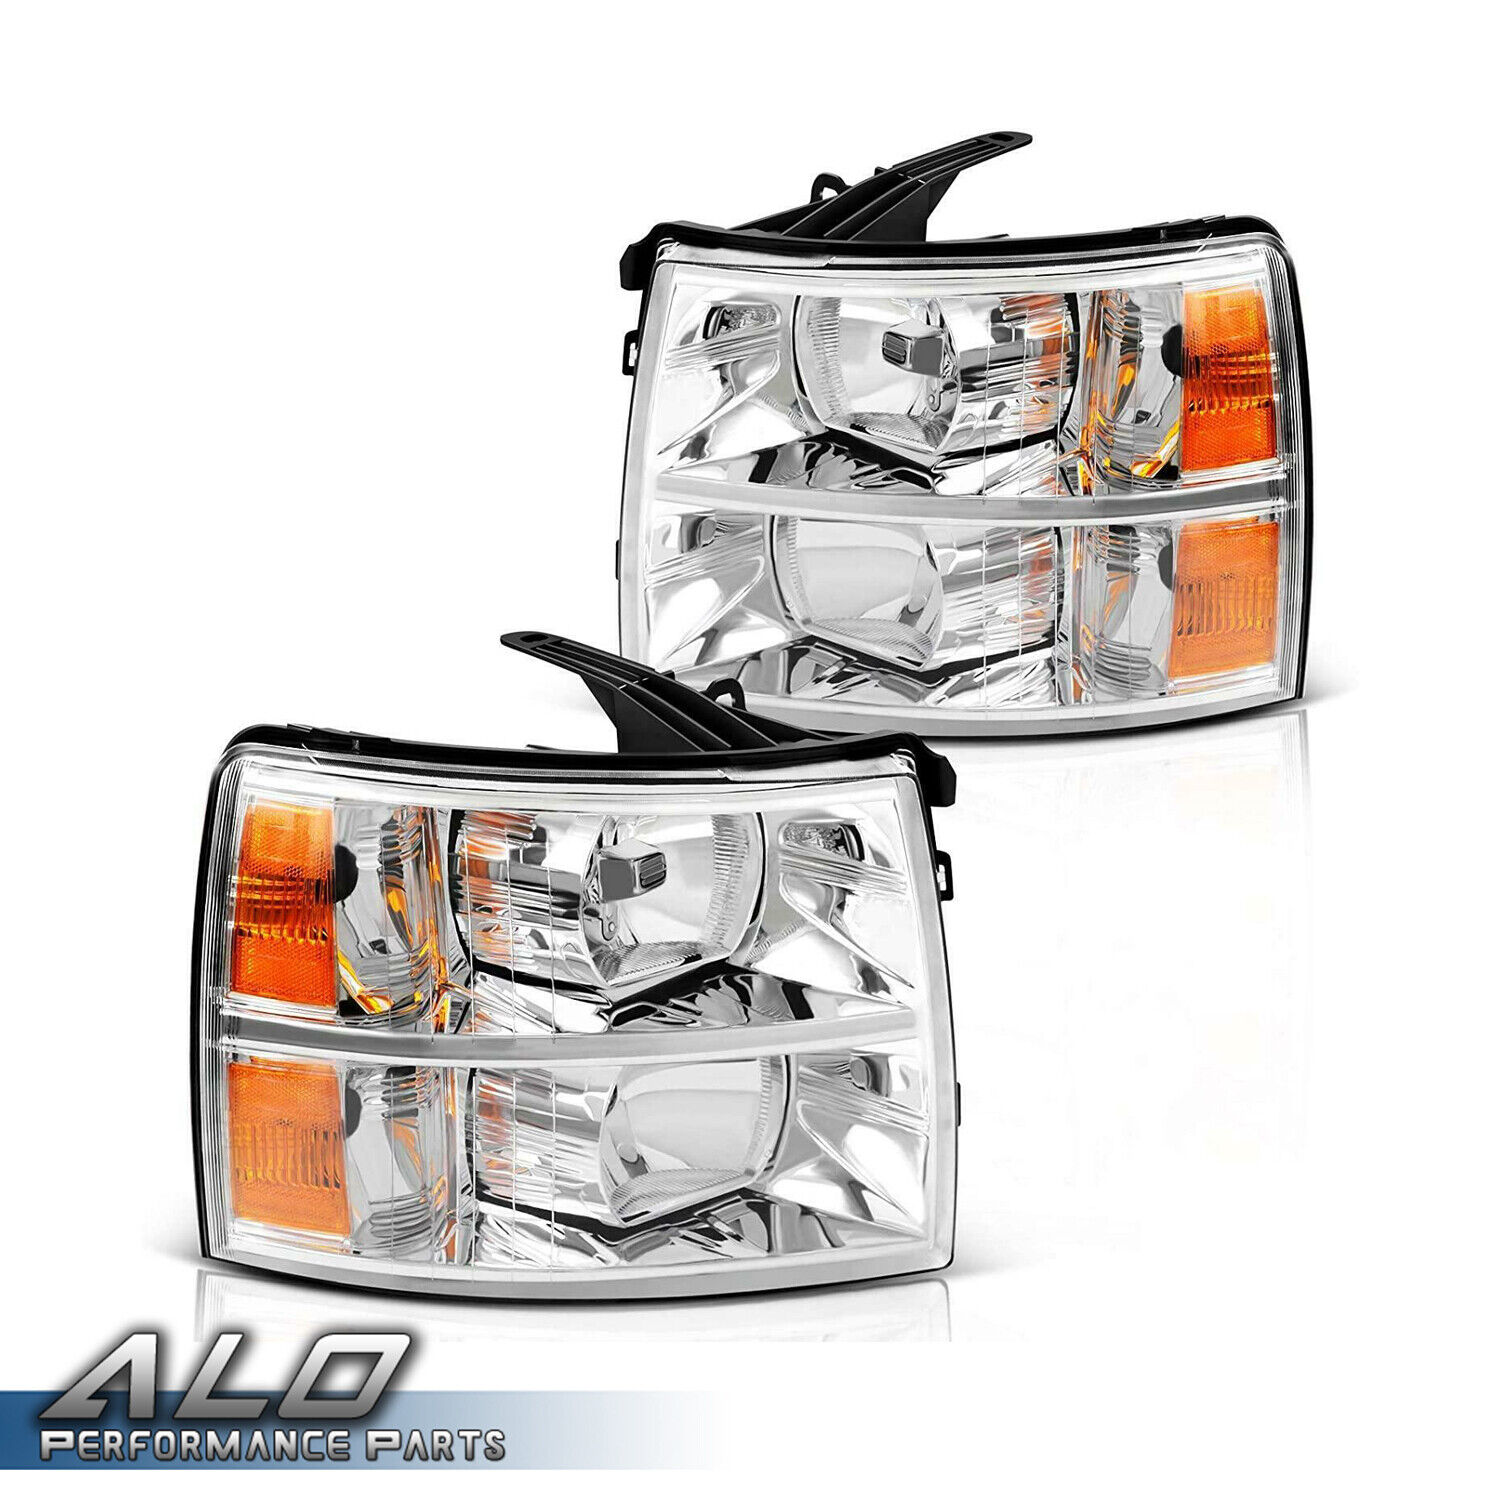 Chrome Headlights Assembly Fit For 2007-2014 Chevy Silverado 1500 2500HD 3500HD